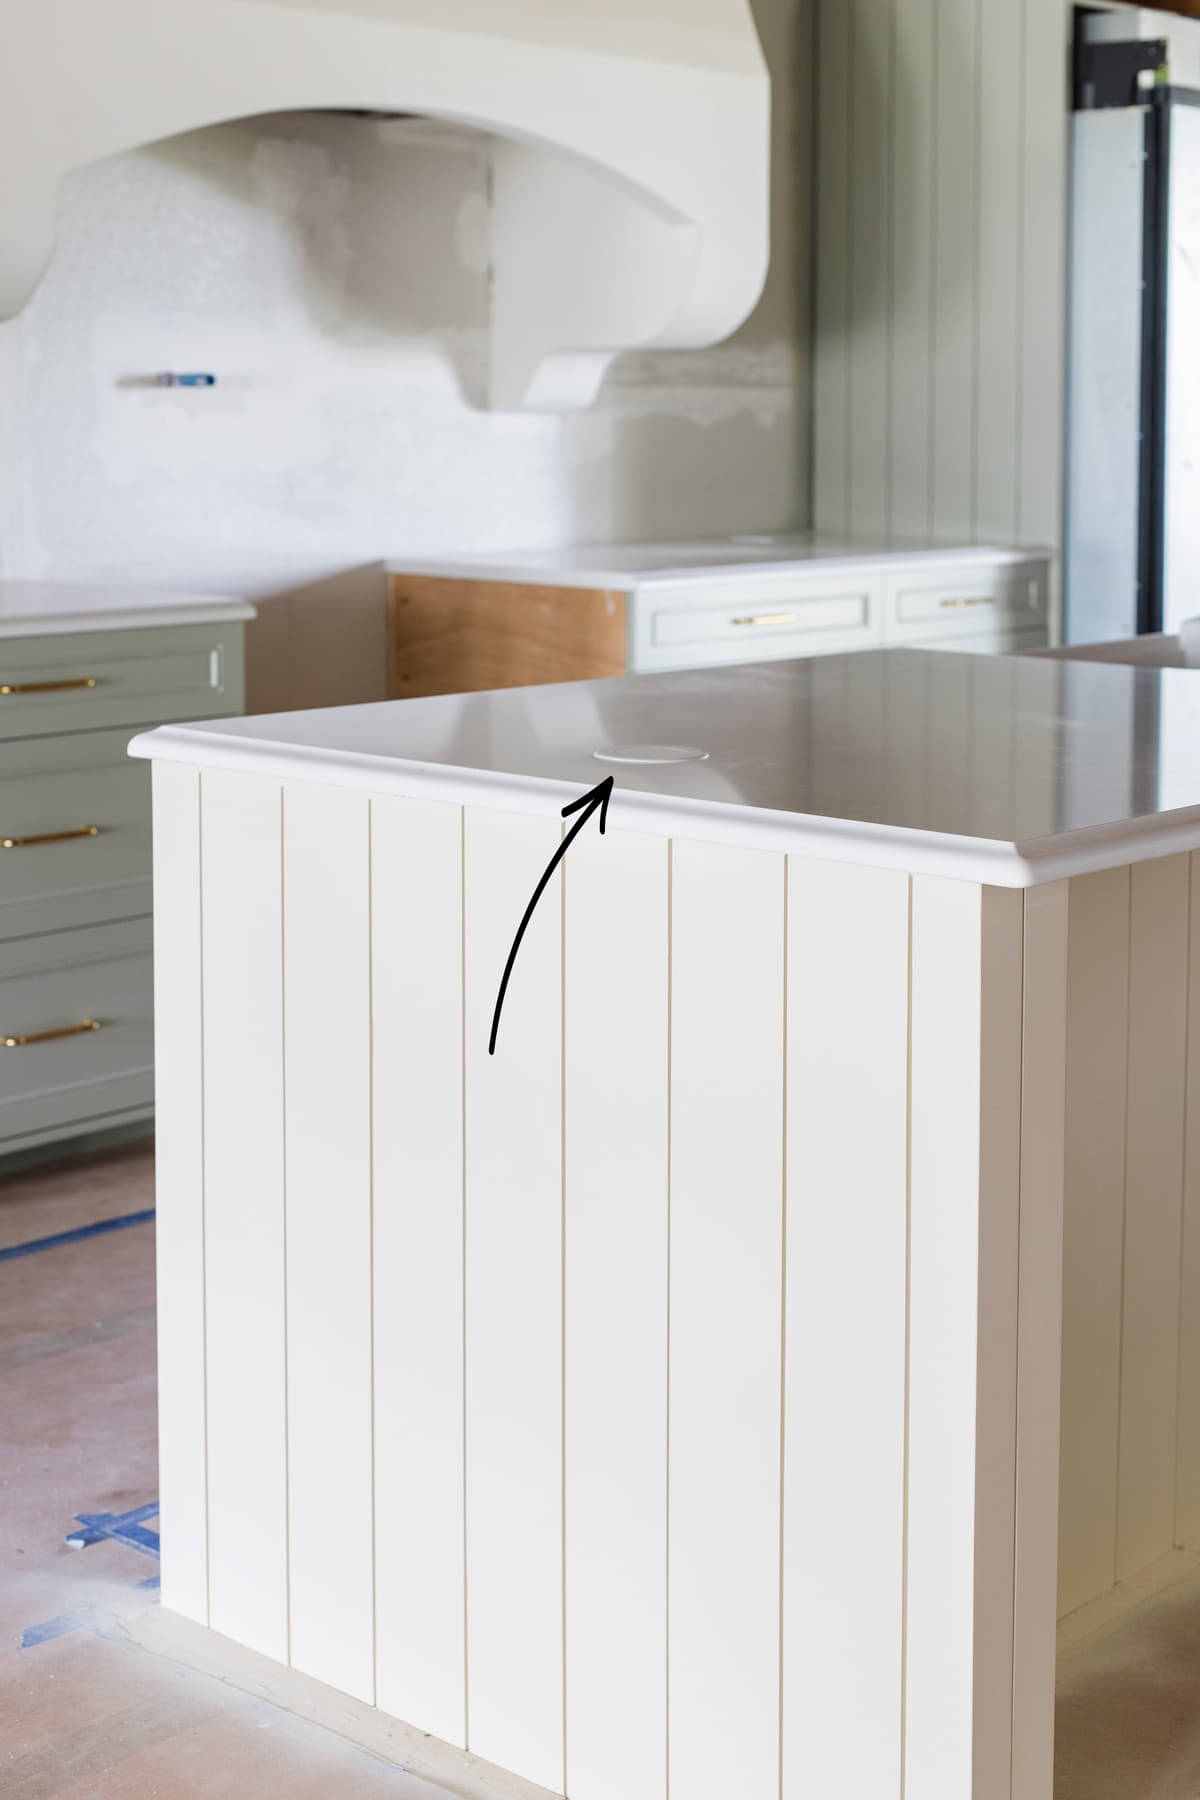 Kitchen Island Outlet Ideas: Clever Ways to Hide and Conceal Power Sources